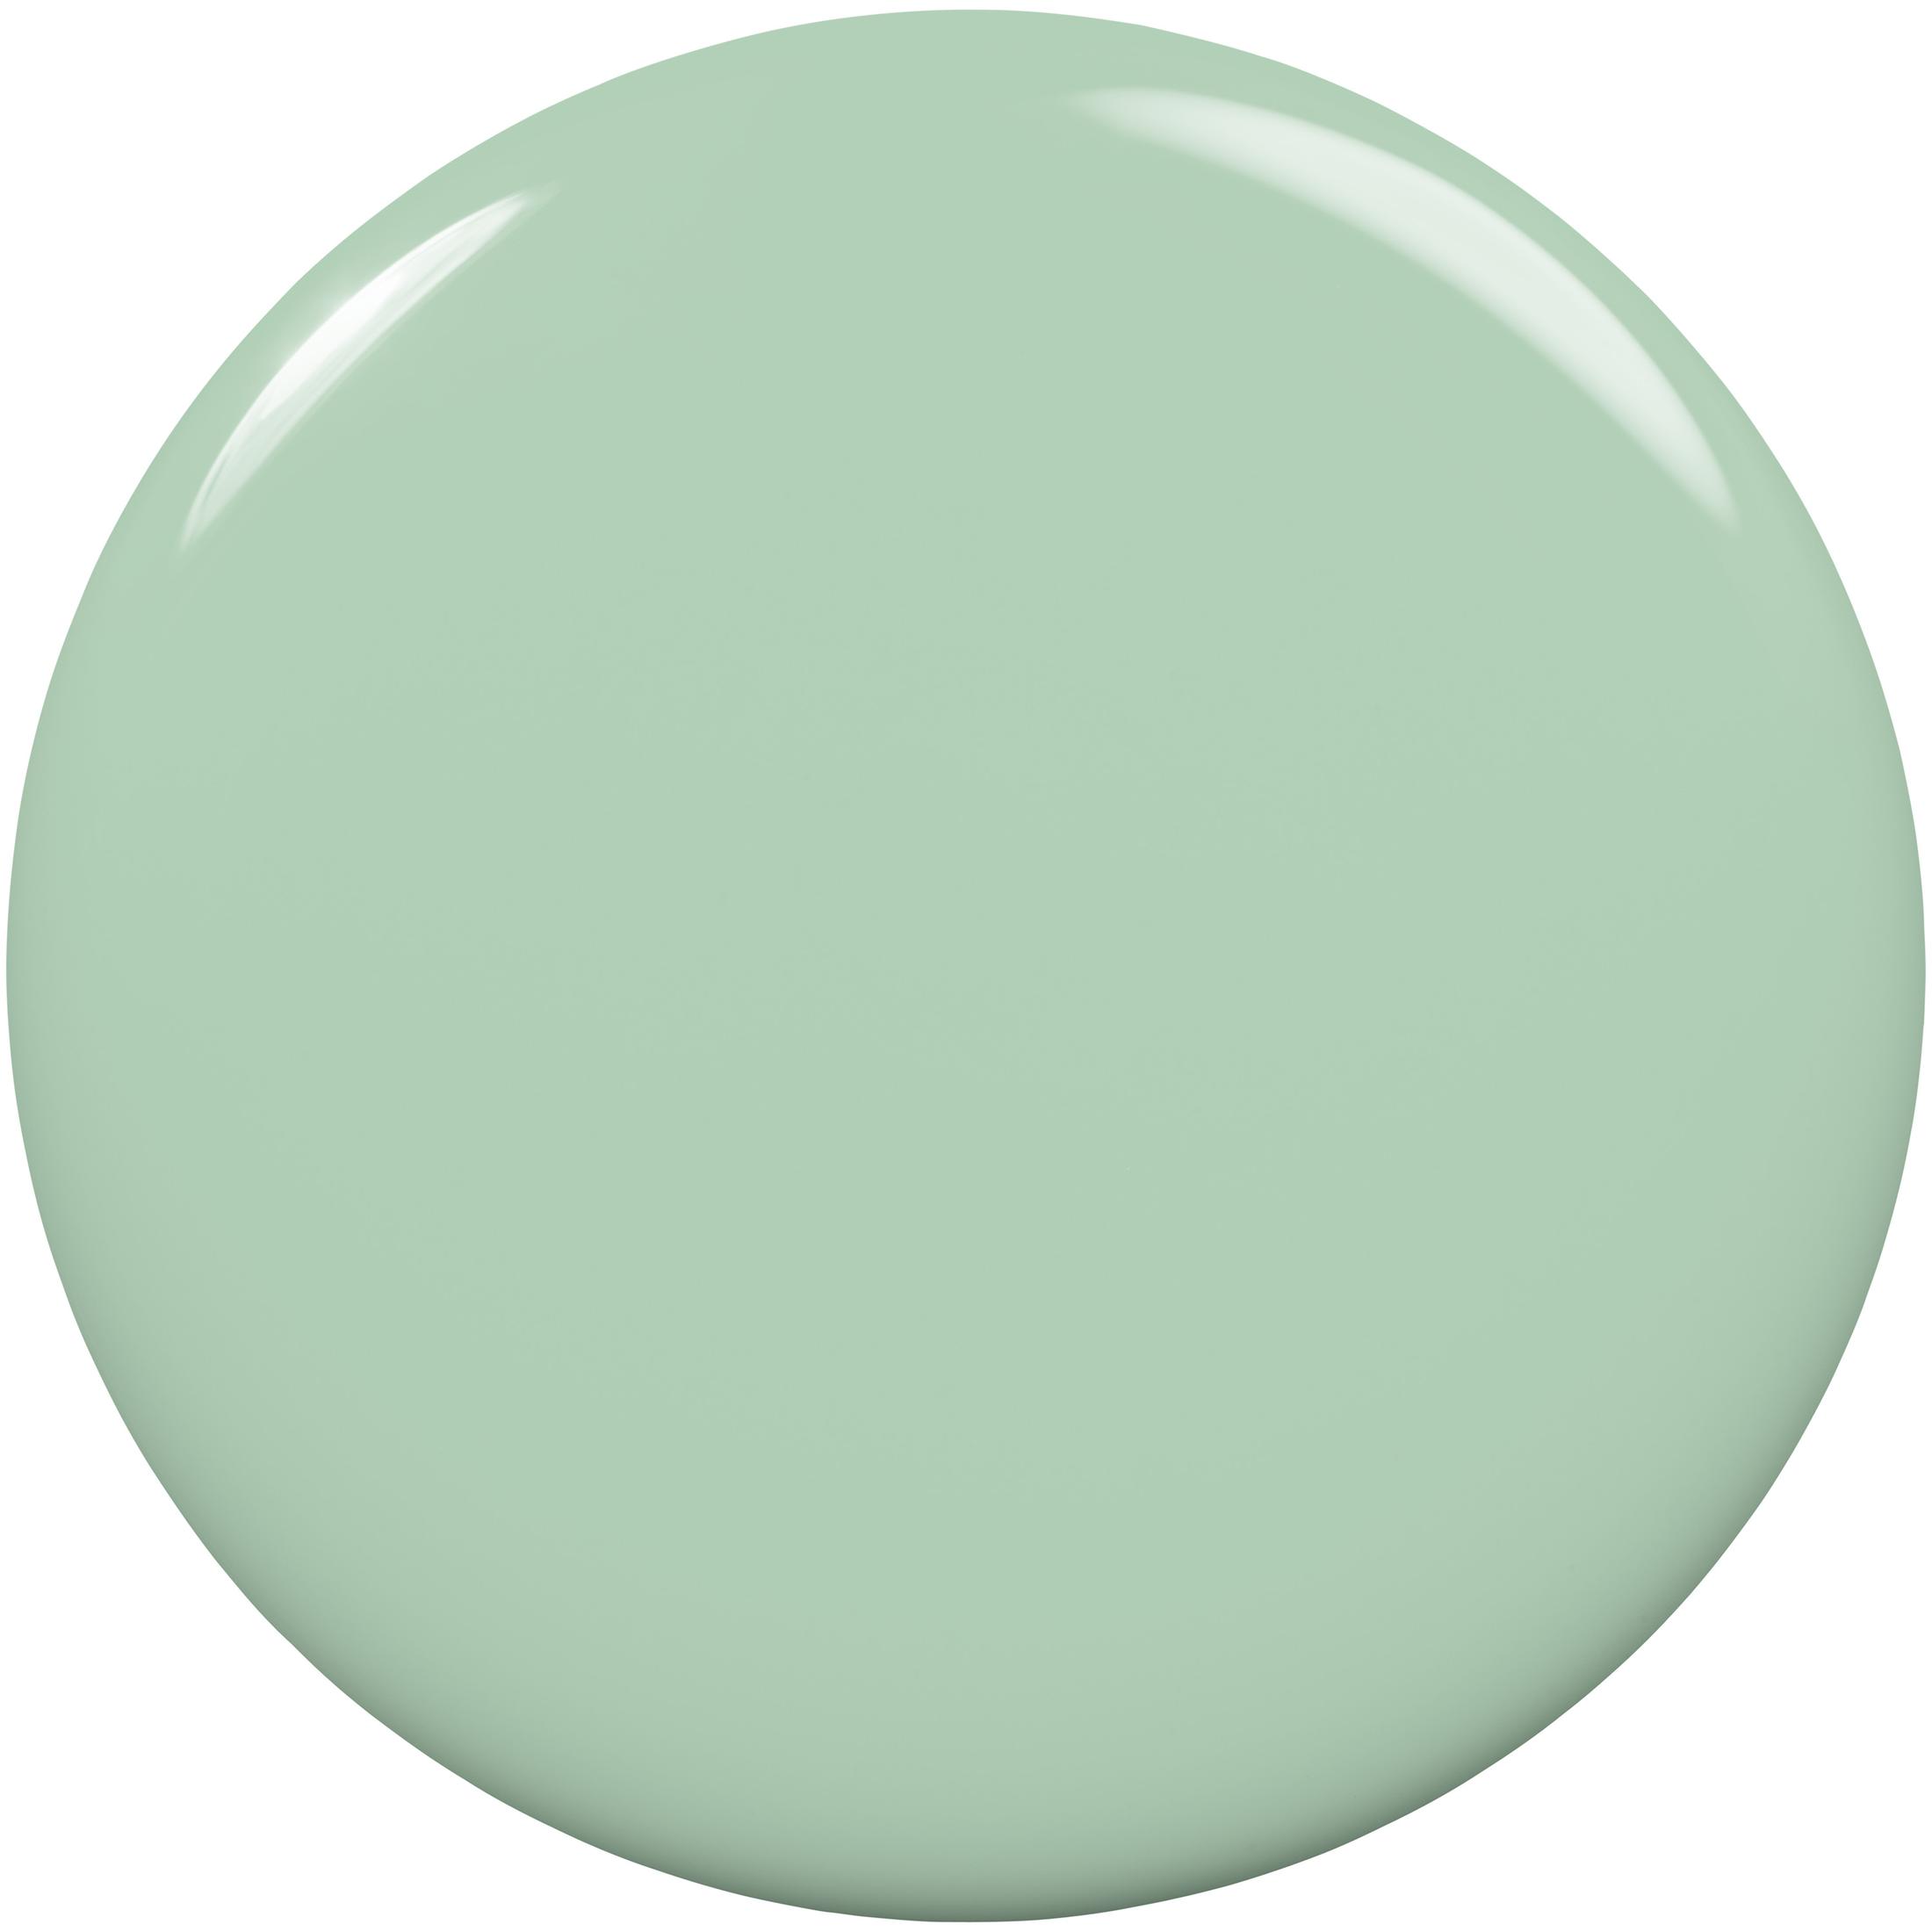 essie Salon Quality Nail Polish, Turquoise and Caicos, Muted Green, 0.46 fl. oz Bottle - image 3 of 13